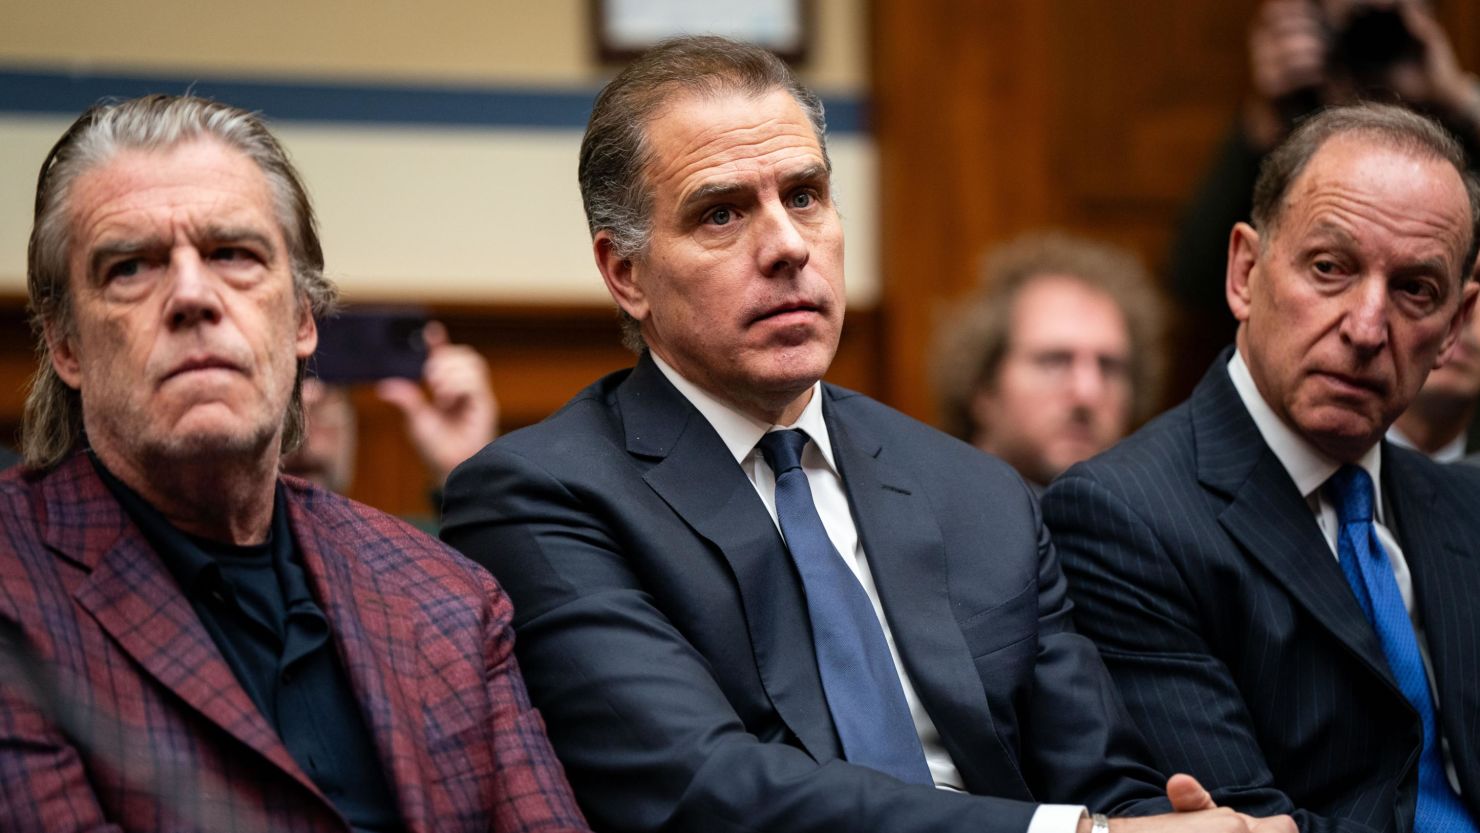 Hunter Biden pleads not guilty to federal tax charges CNN Politics